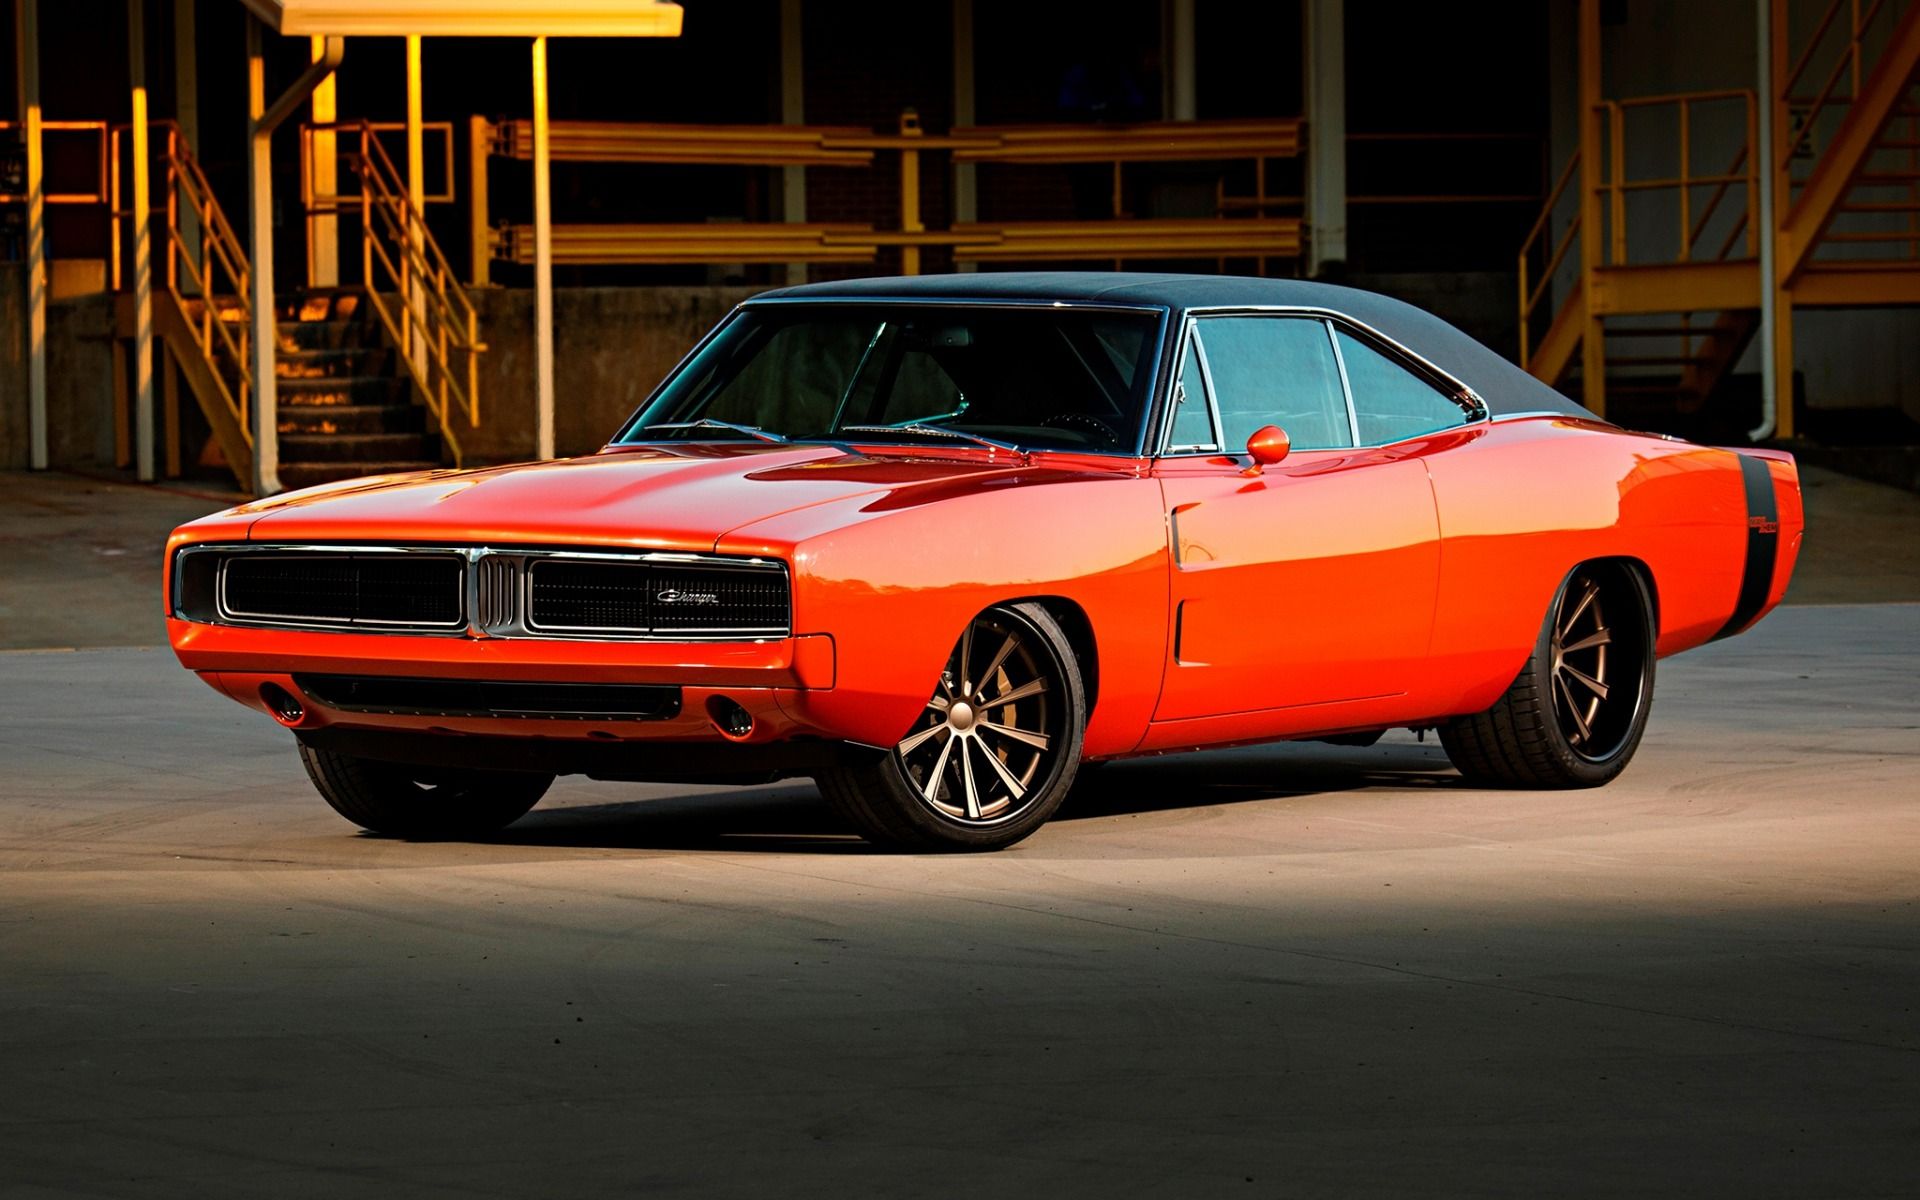 Dodge Charger, Tuning, Muscle Cars, 1969 Cars, Retro Charger 2 Generation